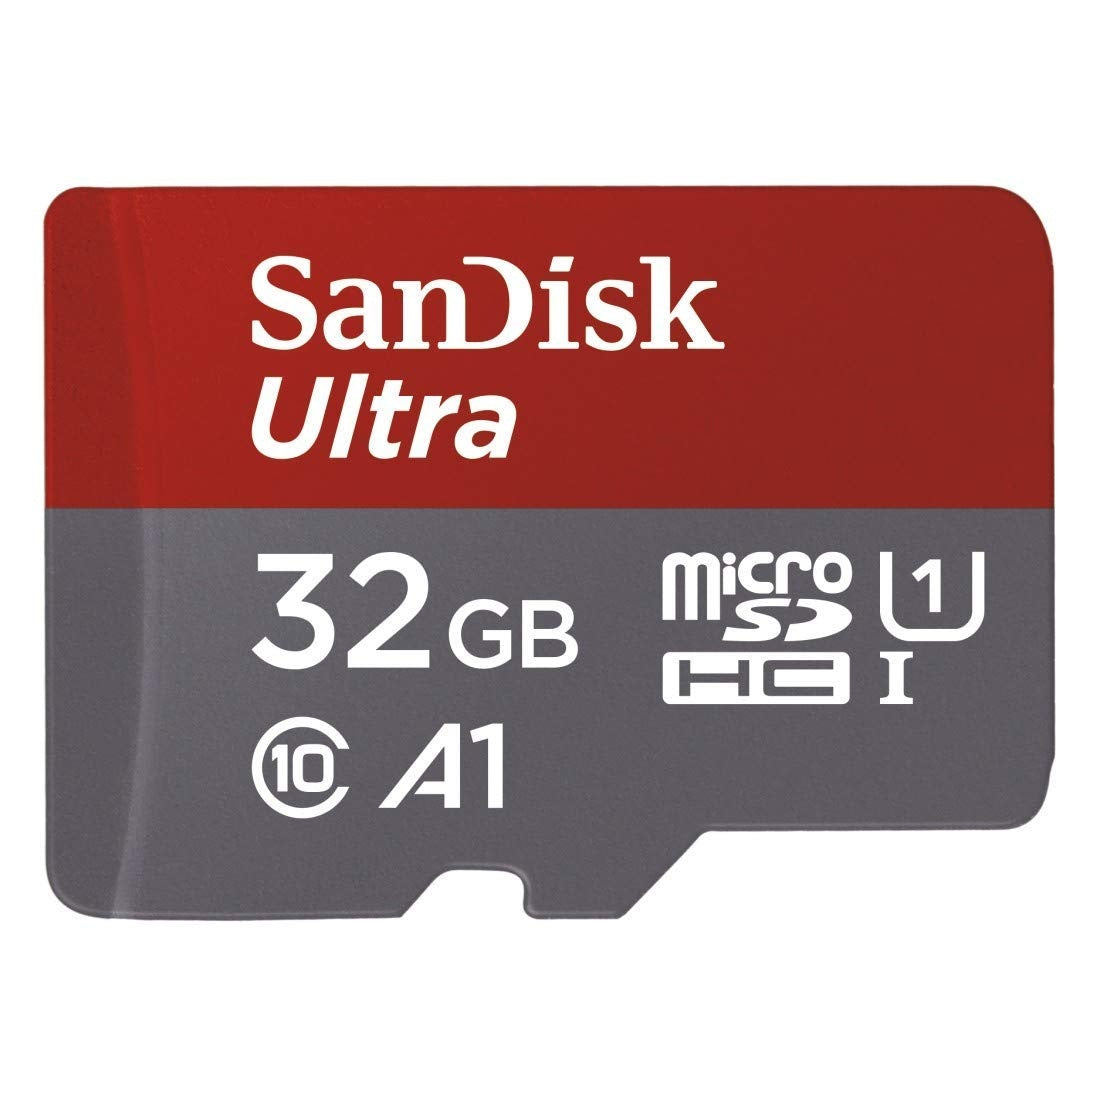 Official SanDisk Micro SD/SDHC 32GB Class 10 Memory Card